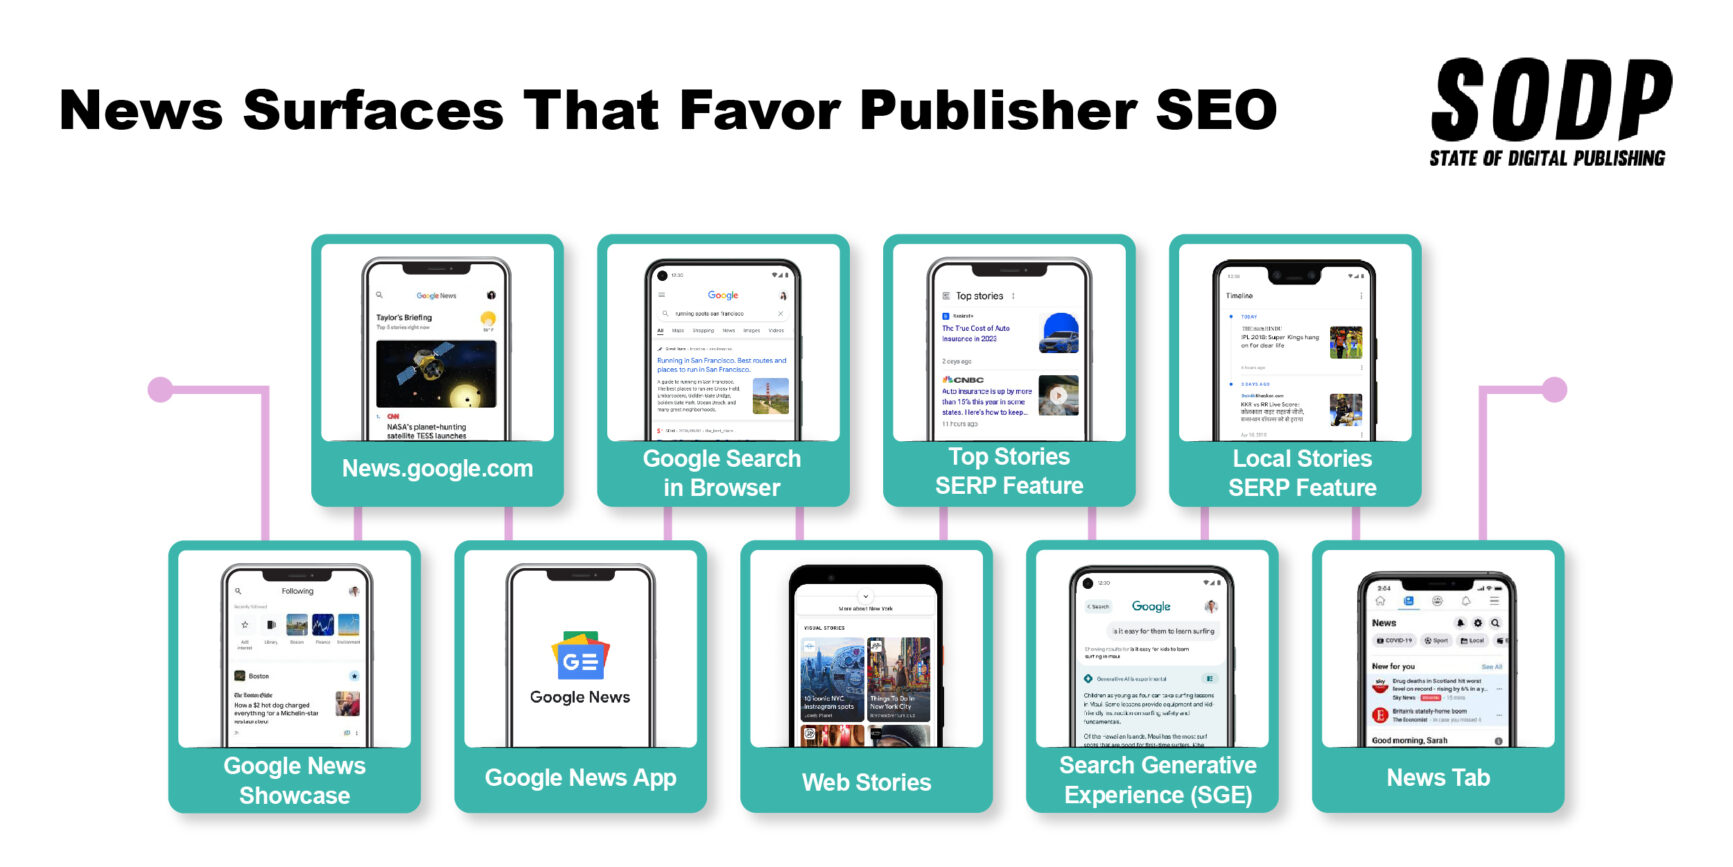 News Surfaces That Favor Publisher SEO